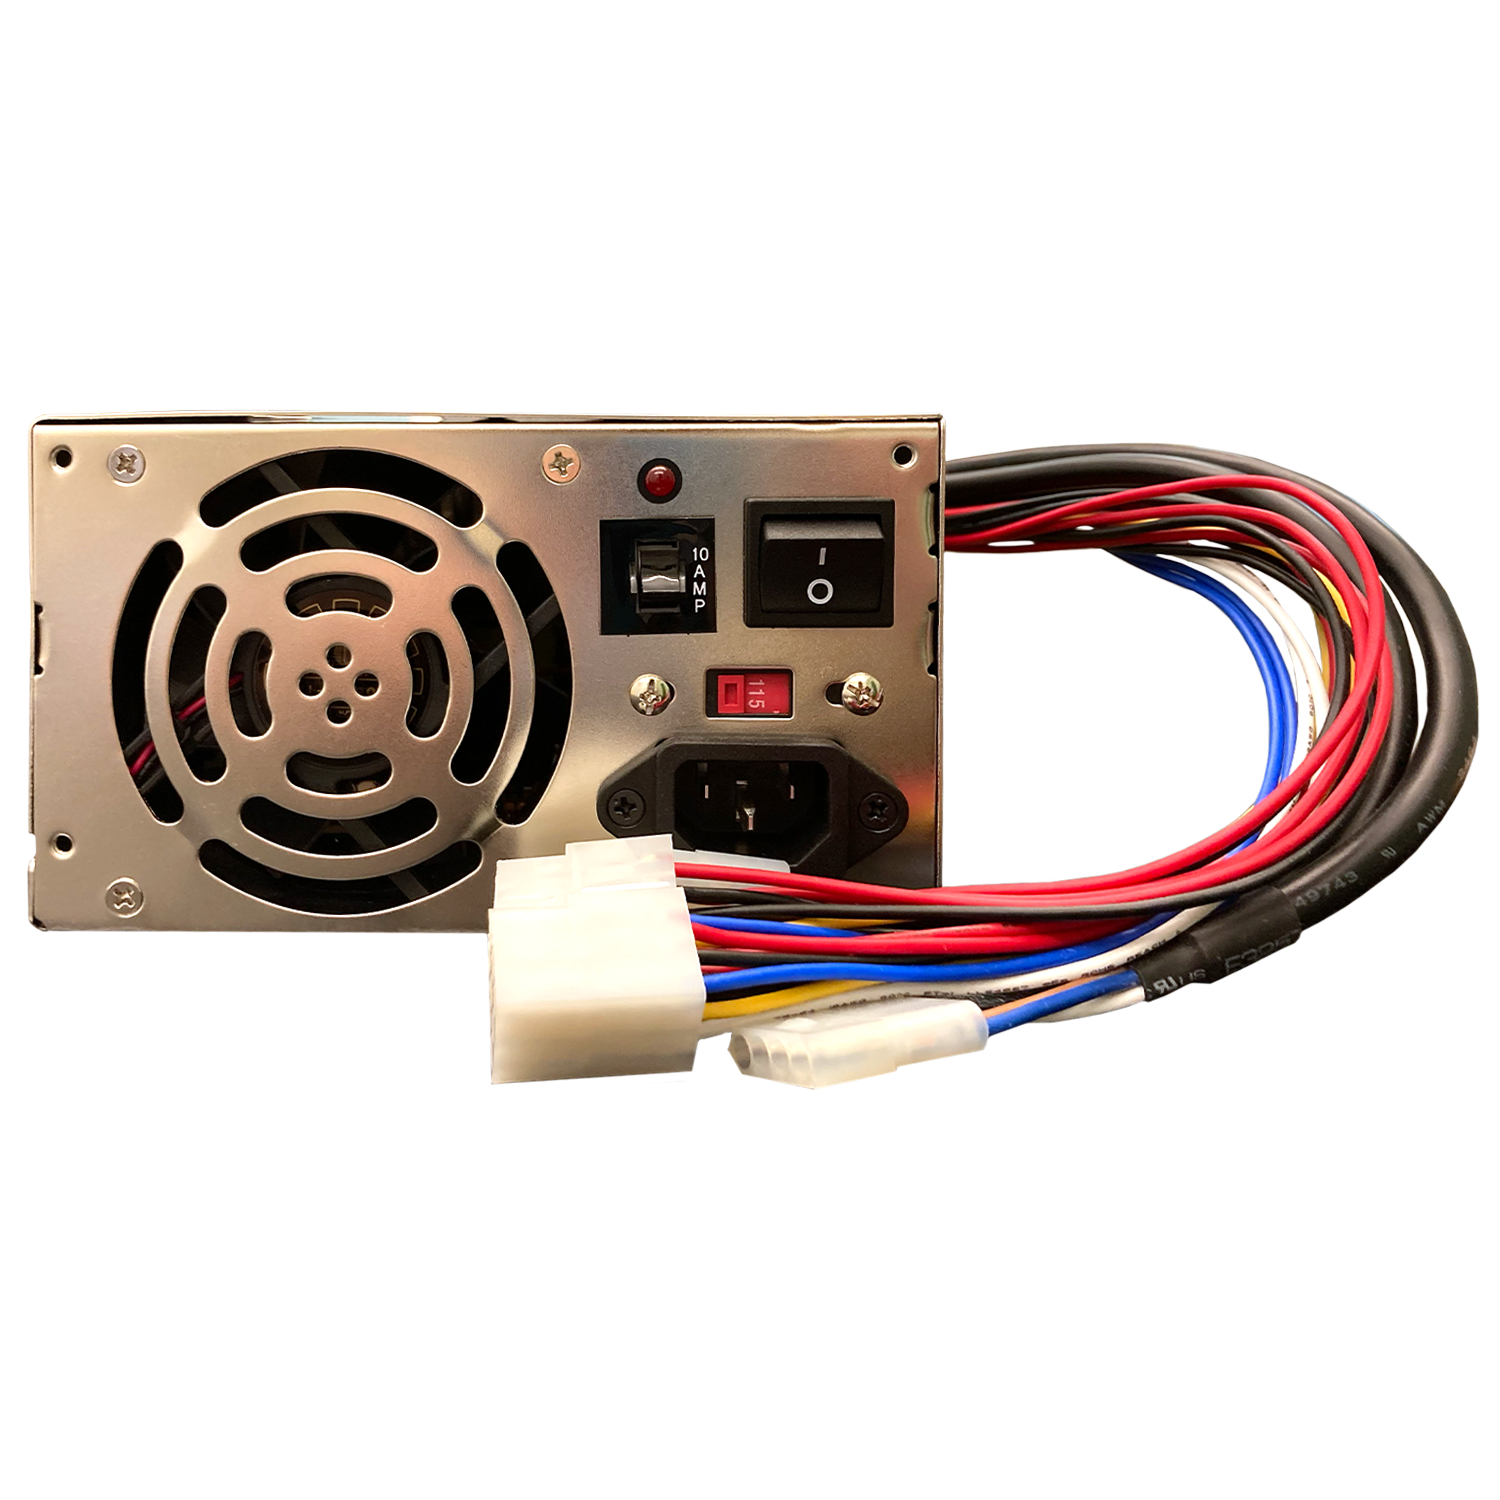 Sold by Miele Manufacturing. 200-Watt Power Supply with Resistor: Refurbished  Upgraded fan with lubricated sleeve bearing: life expectancy of 35,000 hours under optimal conditions W/S JT Power Cord (not included)